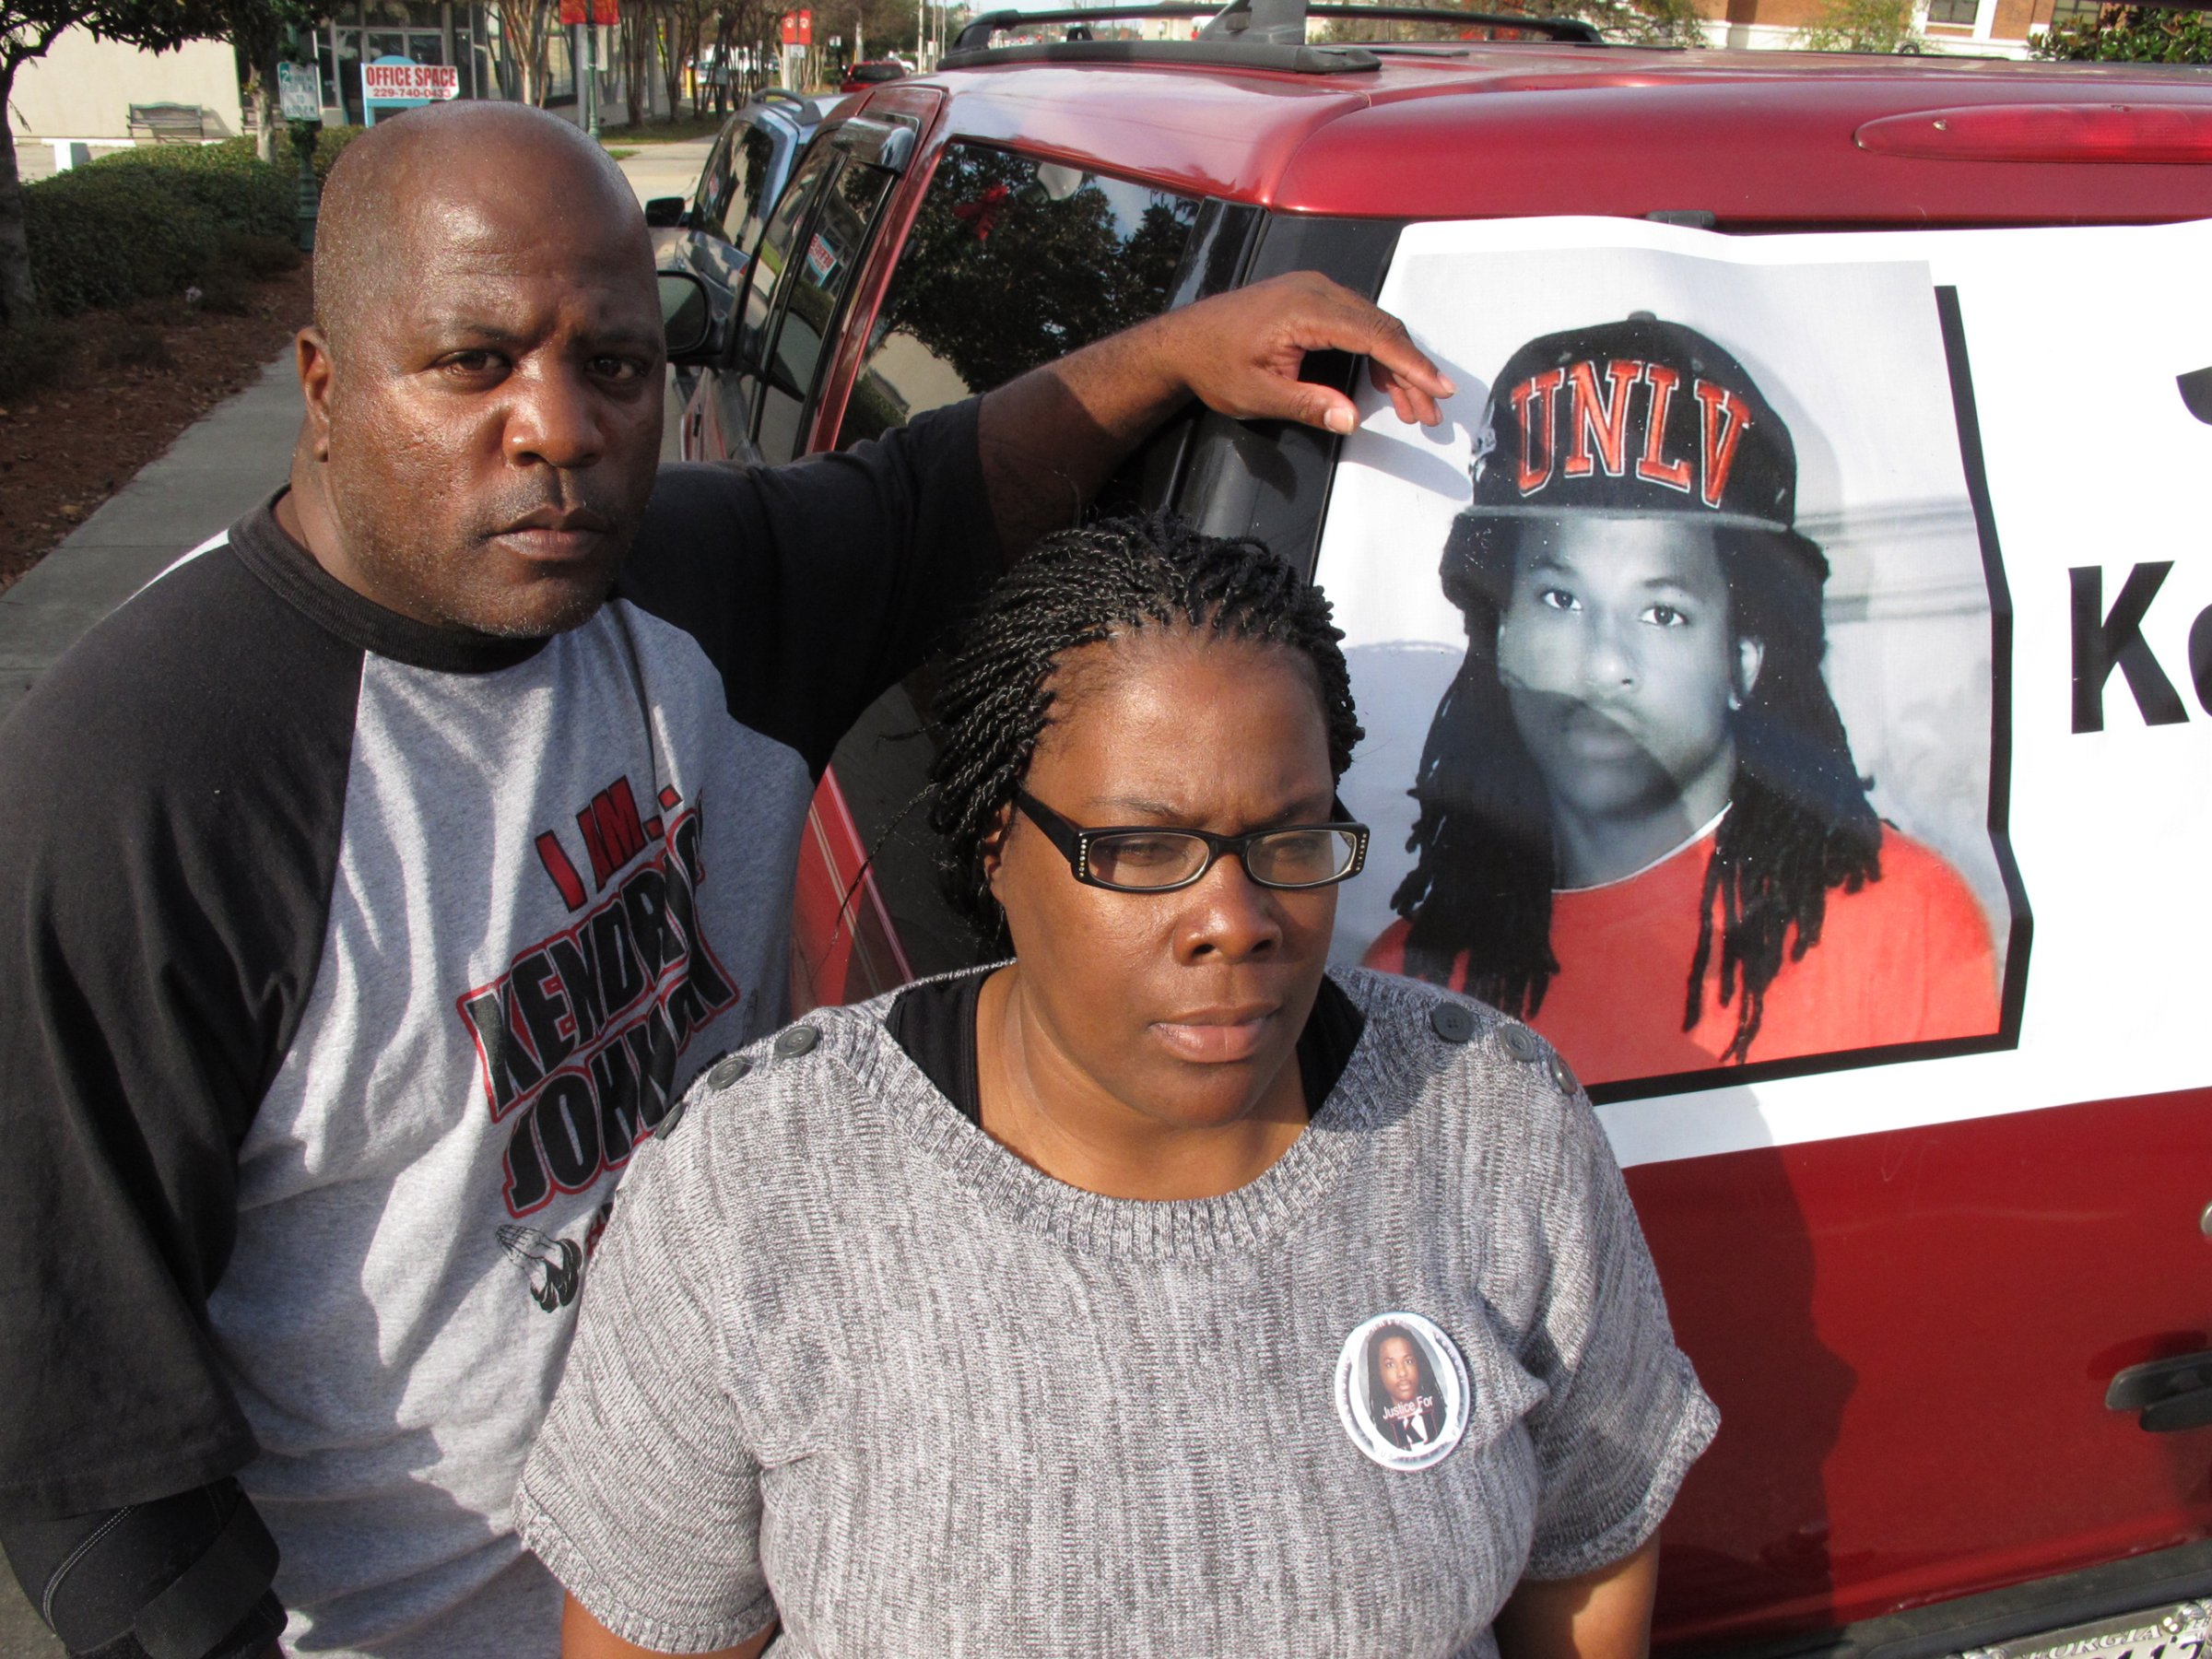 FILE- In this Dec. 13, 2013 file photo, Kenneth and Jacquelyn Johnson stand next to a banner on their SUV showing their late son, Kendrick Johnson in Valdosta, Ga. The parents of Kendrick Johnson, who was found dead inside a rolled-up gym mat at school, have dropped a wrongful death lawsuit accusing two brothers of killing their son. Chevene King, the Johnsons’ attorney, told The Valdosta Daily Times, Tuesday, March 1, 2016, the family eventually plans to refile the lawsuit. (AP Photo/Russ Bynum, File)